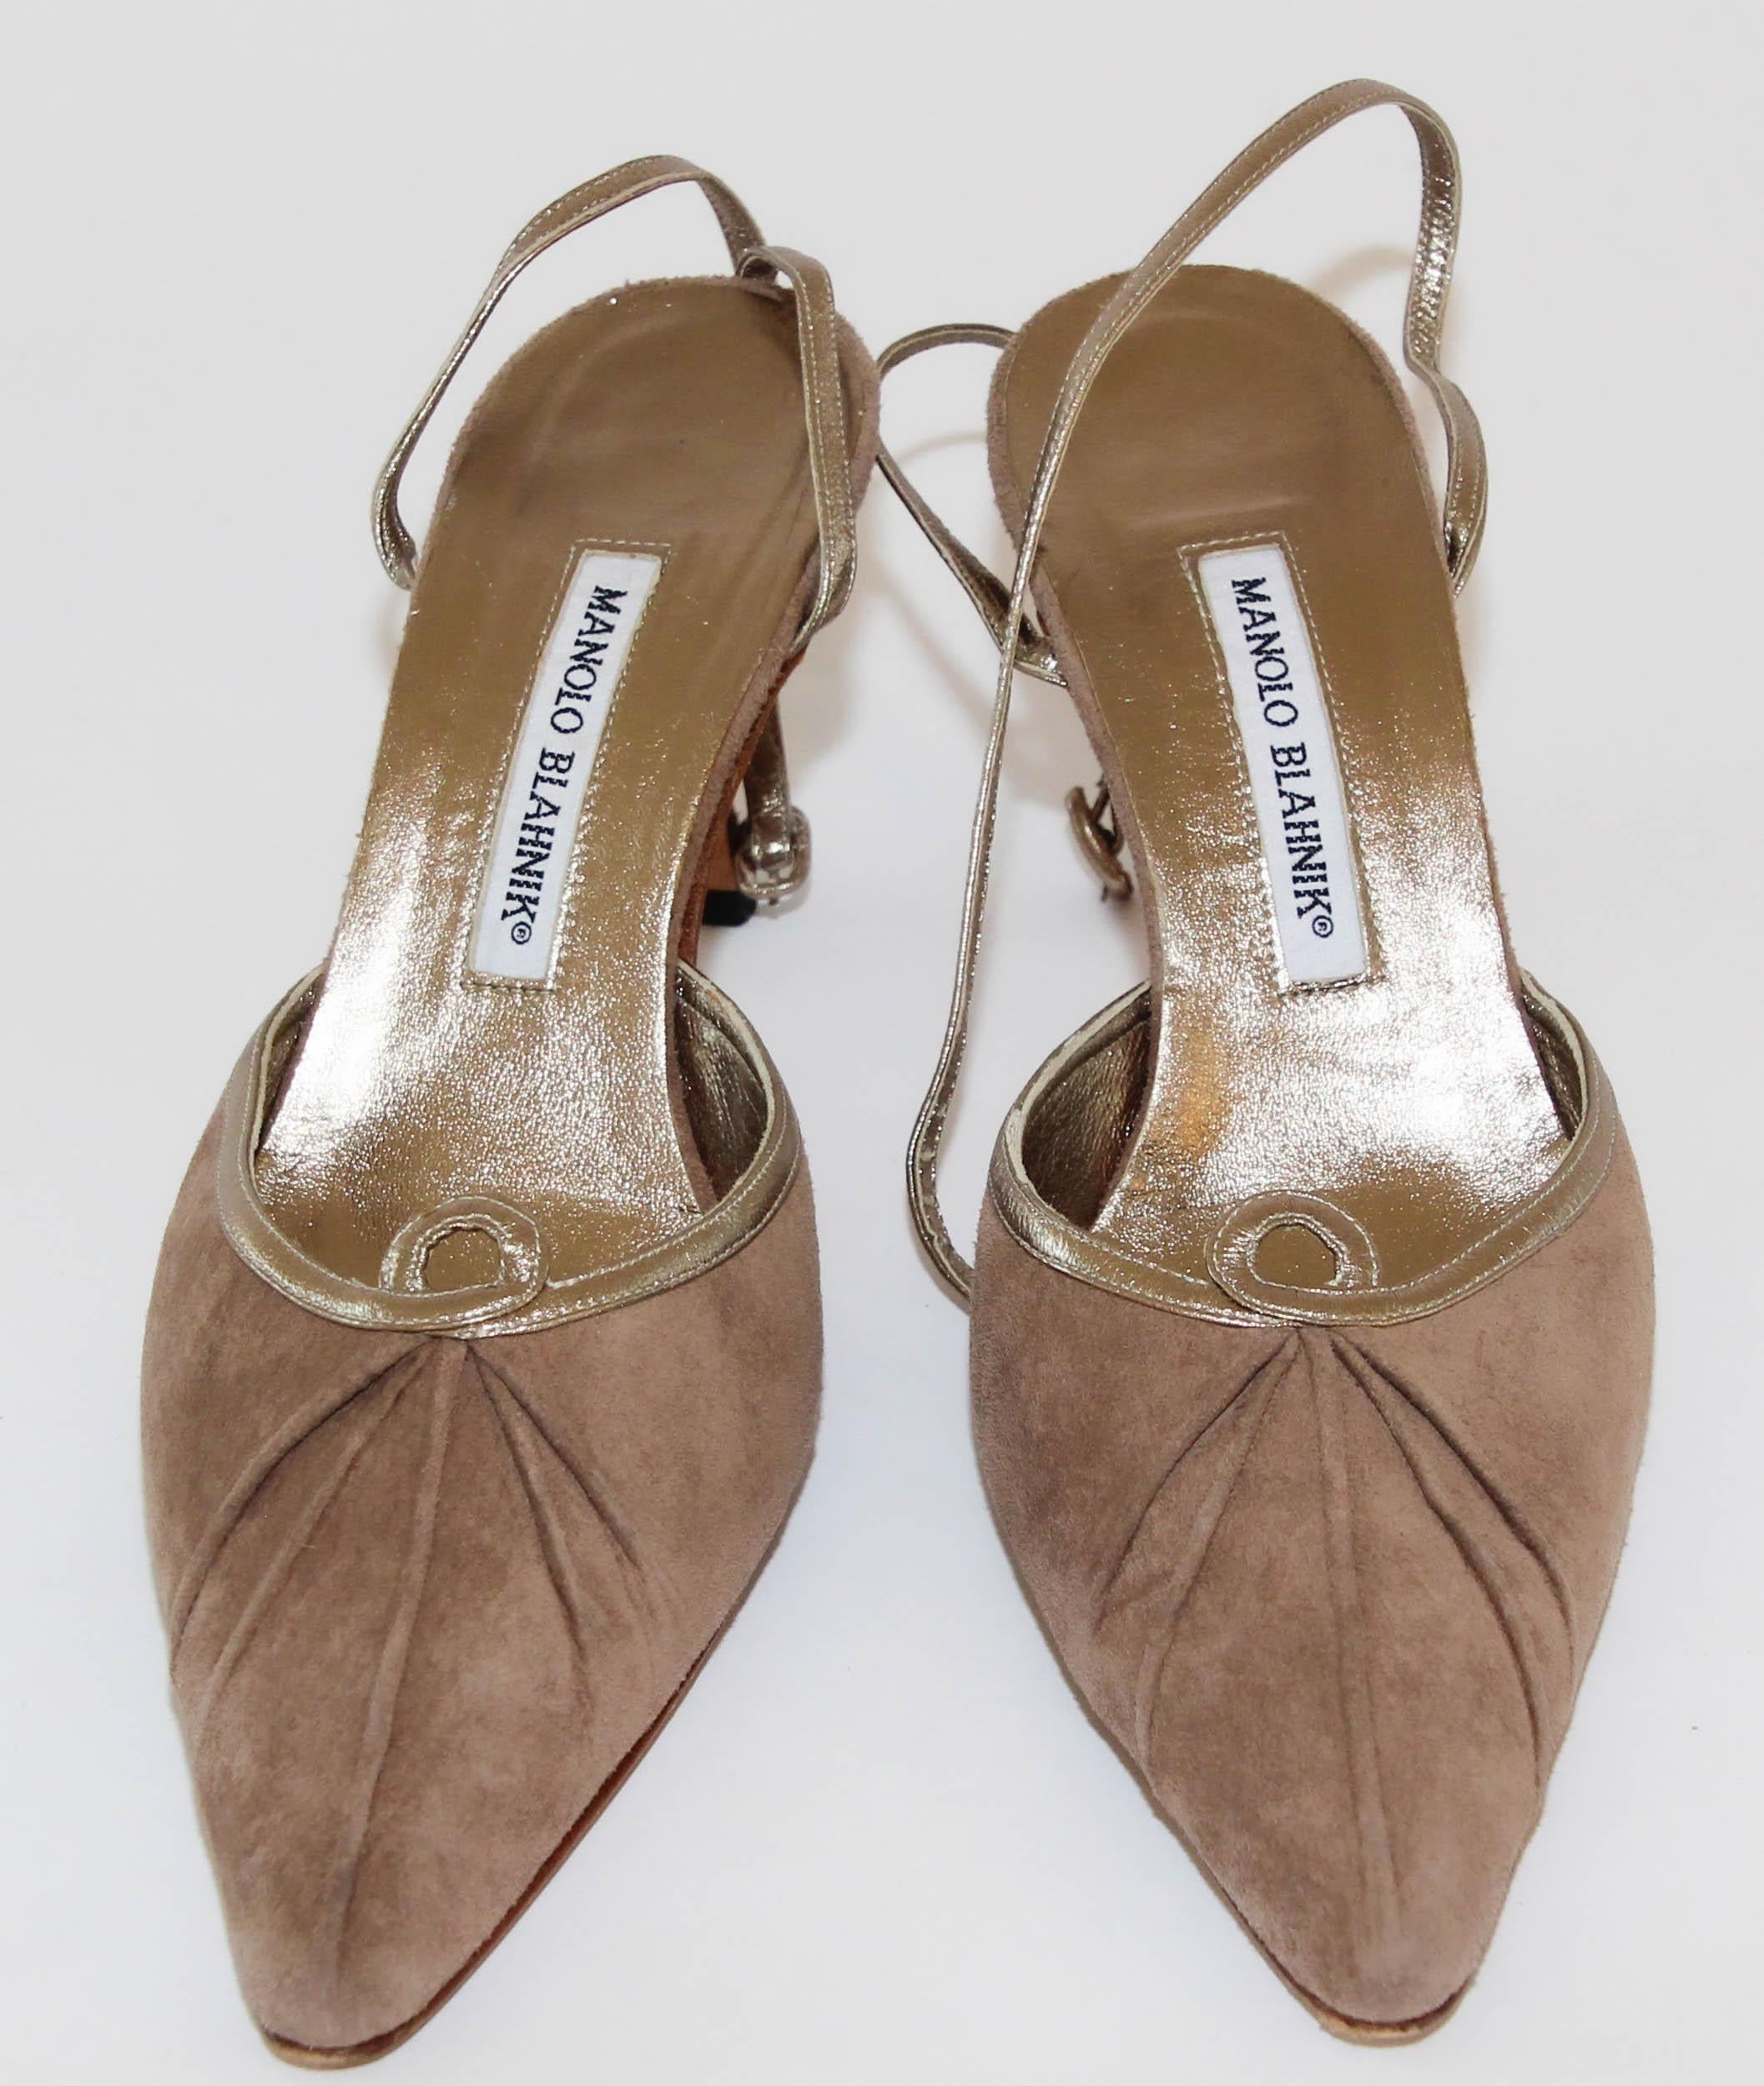 Manolo Blahnik Vintage Suede Shoes With Leather Ankle Straps Size 40 For Sale 3